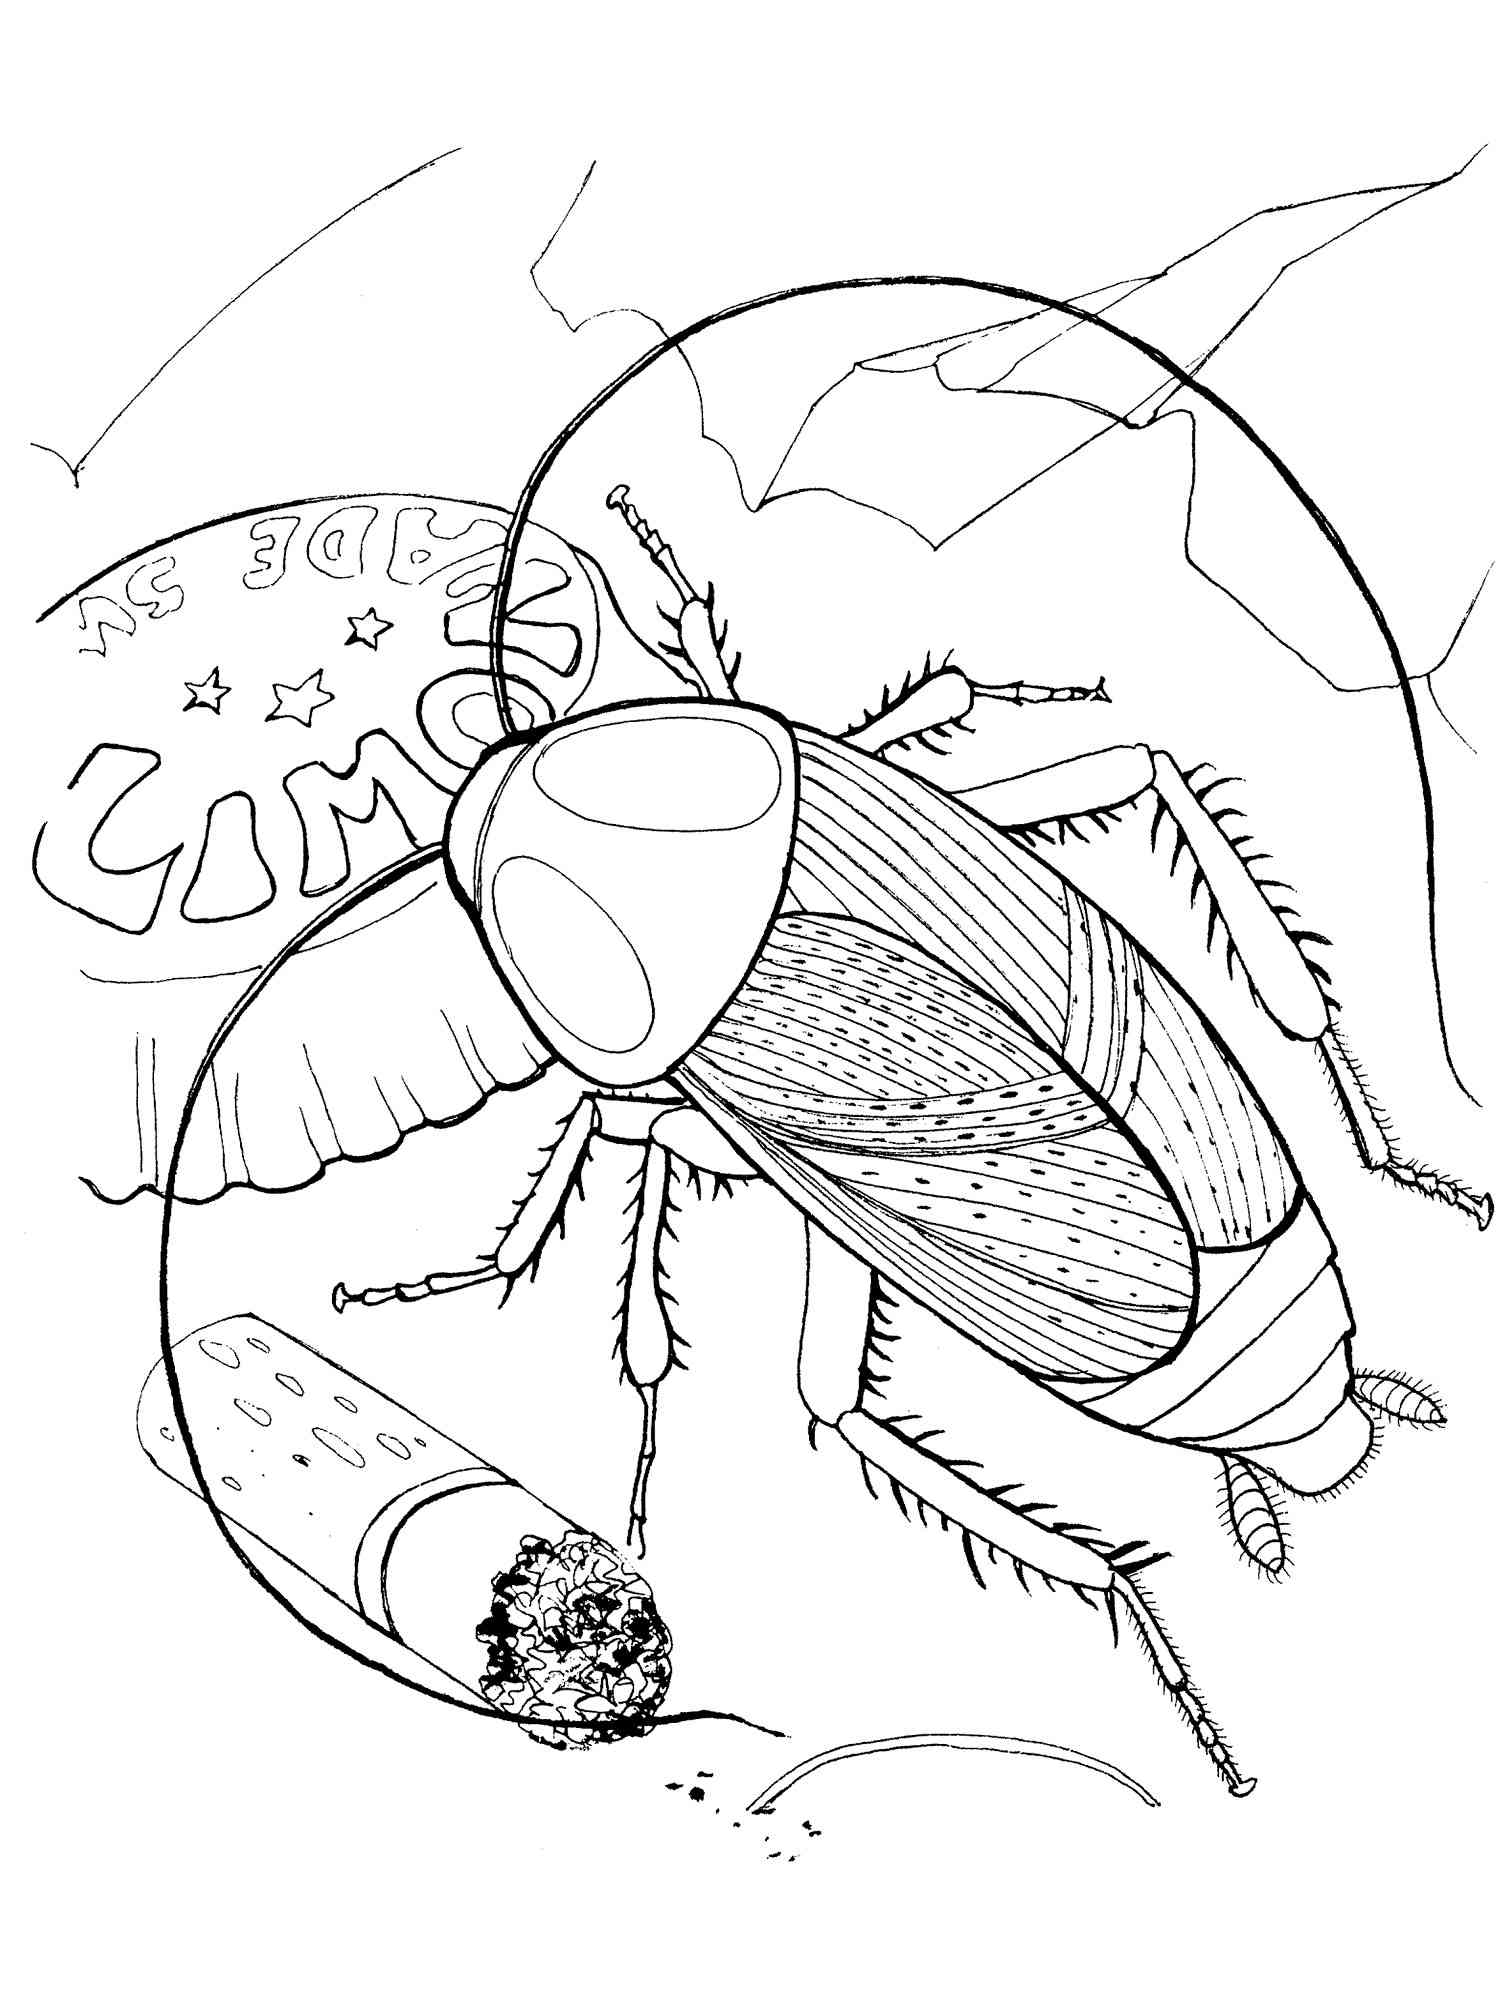 Cockroach in the trash coloring page